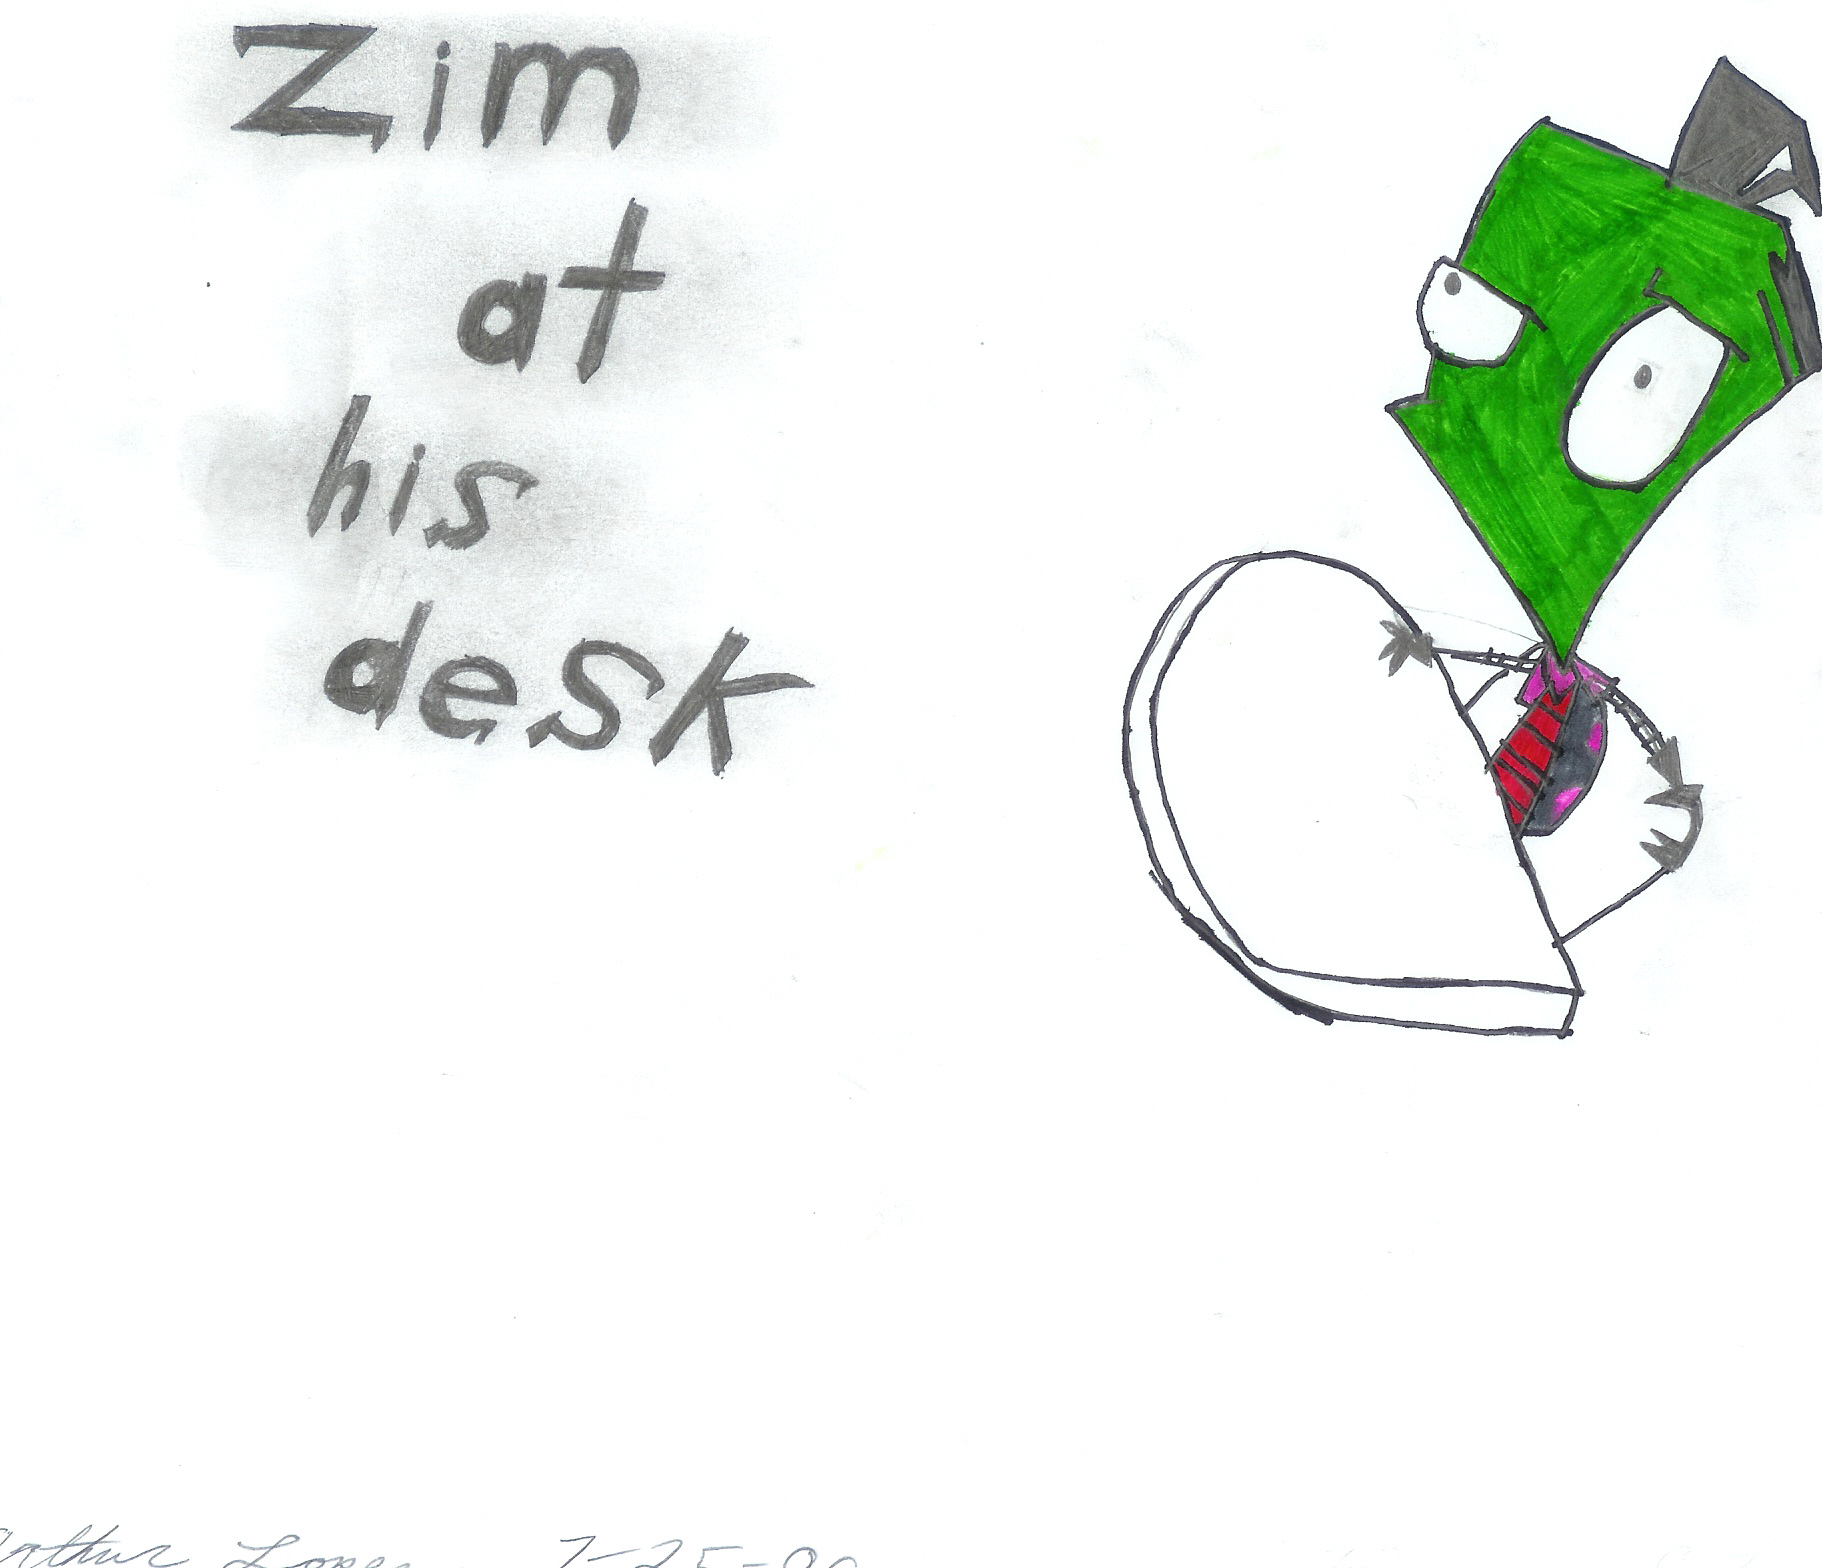 zim at his desk by art3743